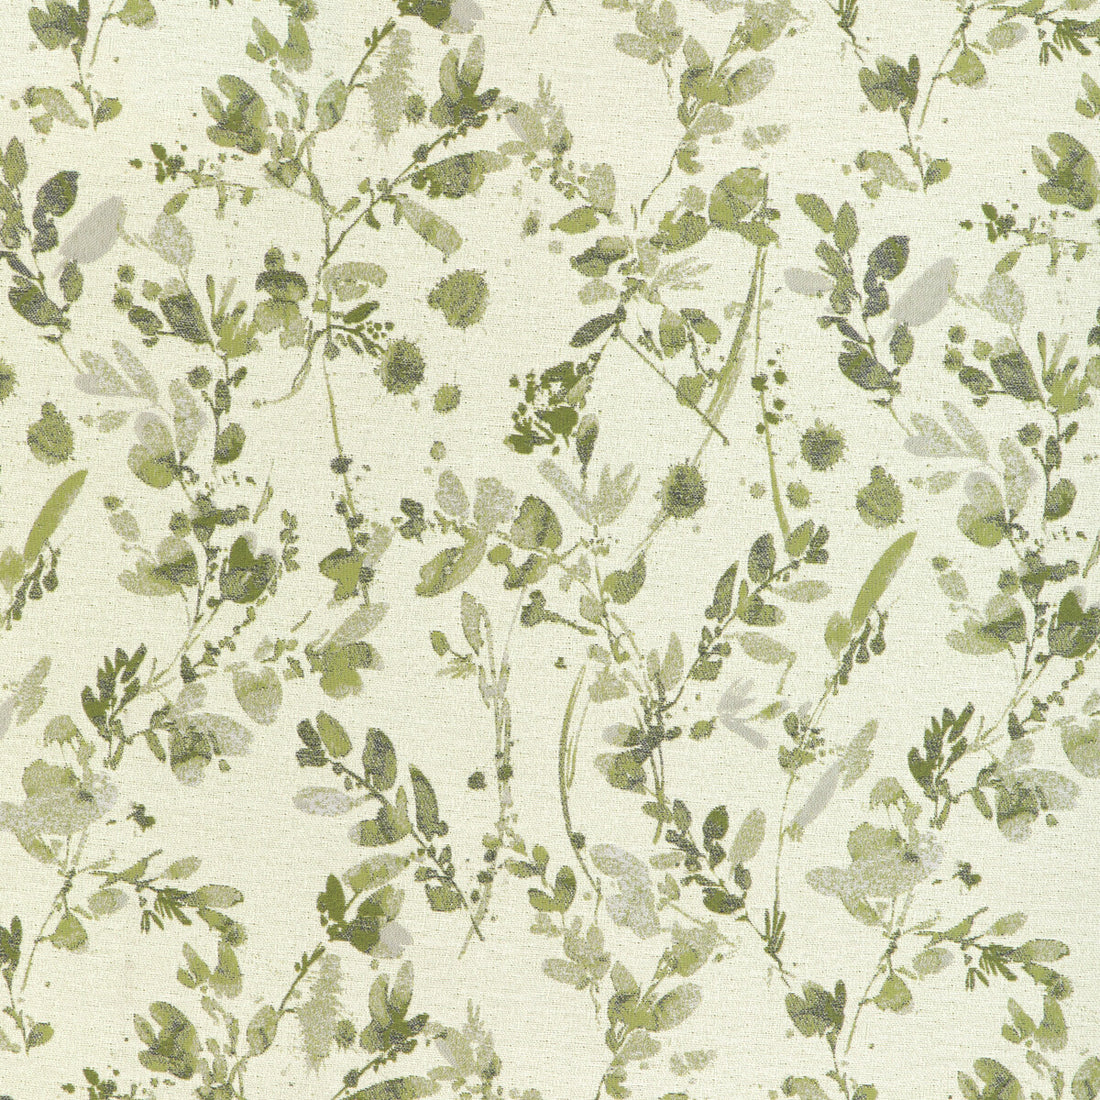 Bayview fabric in spring color - pattern 37072.123.0 - by Kravet Contract in the Chesapeake collection